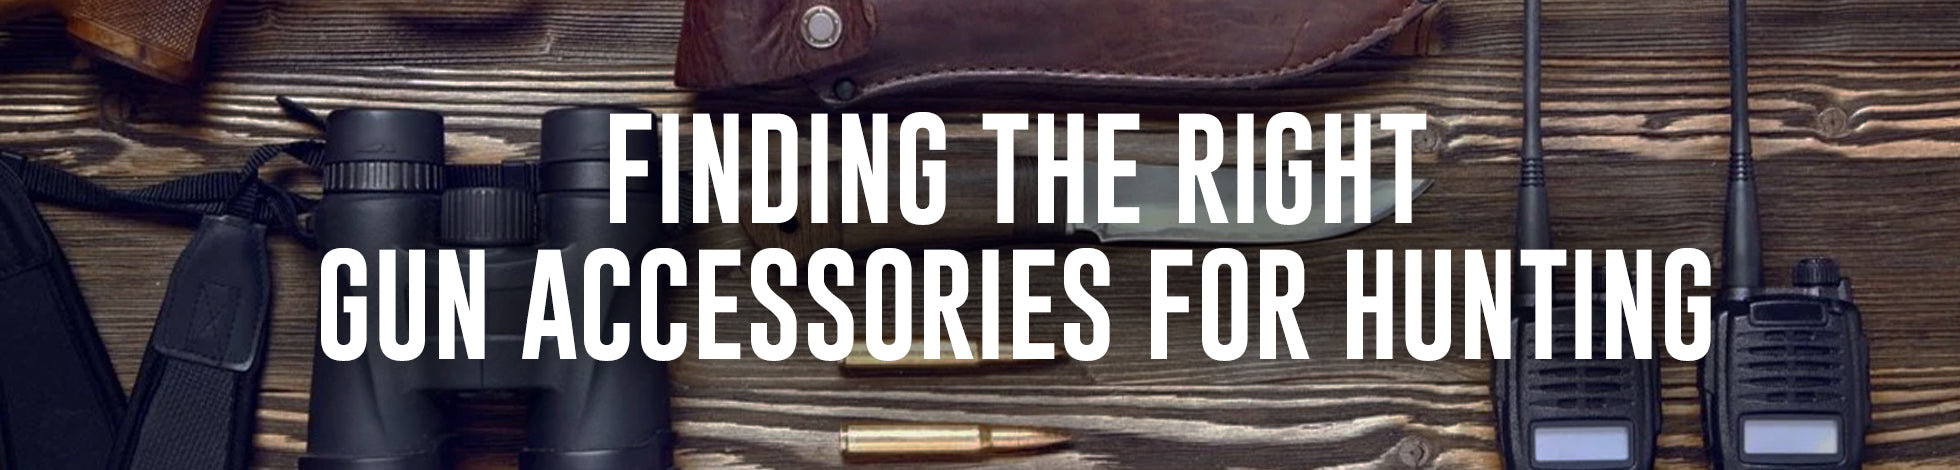 Finding The Right Gun Accessories